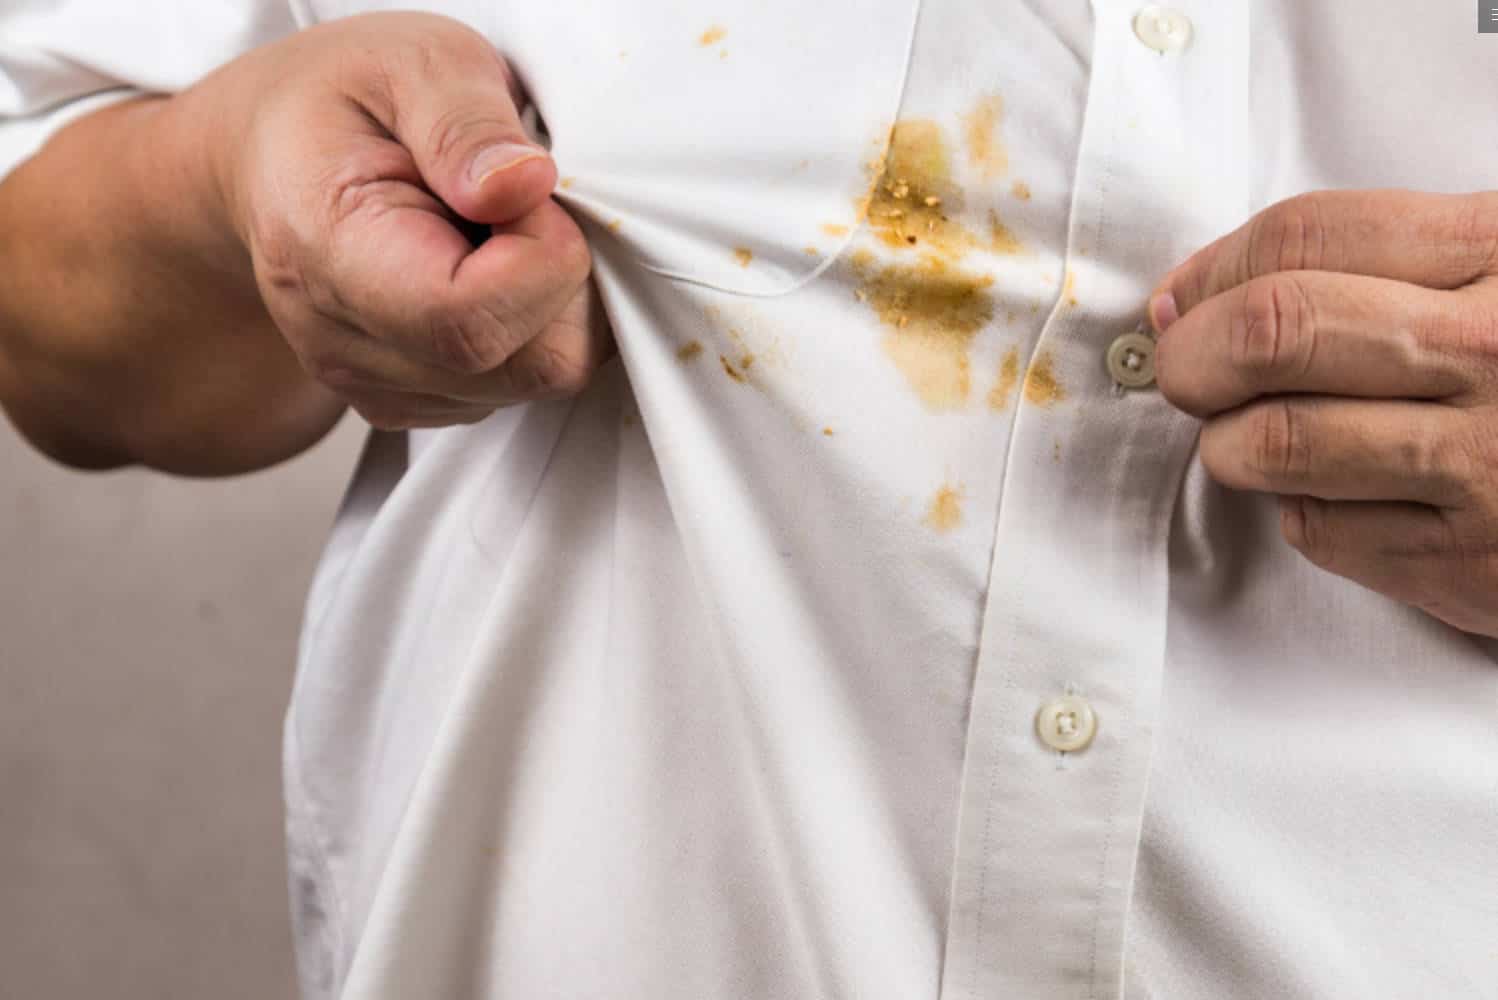 how to get turmeric stains out of clothes